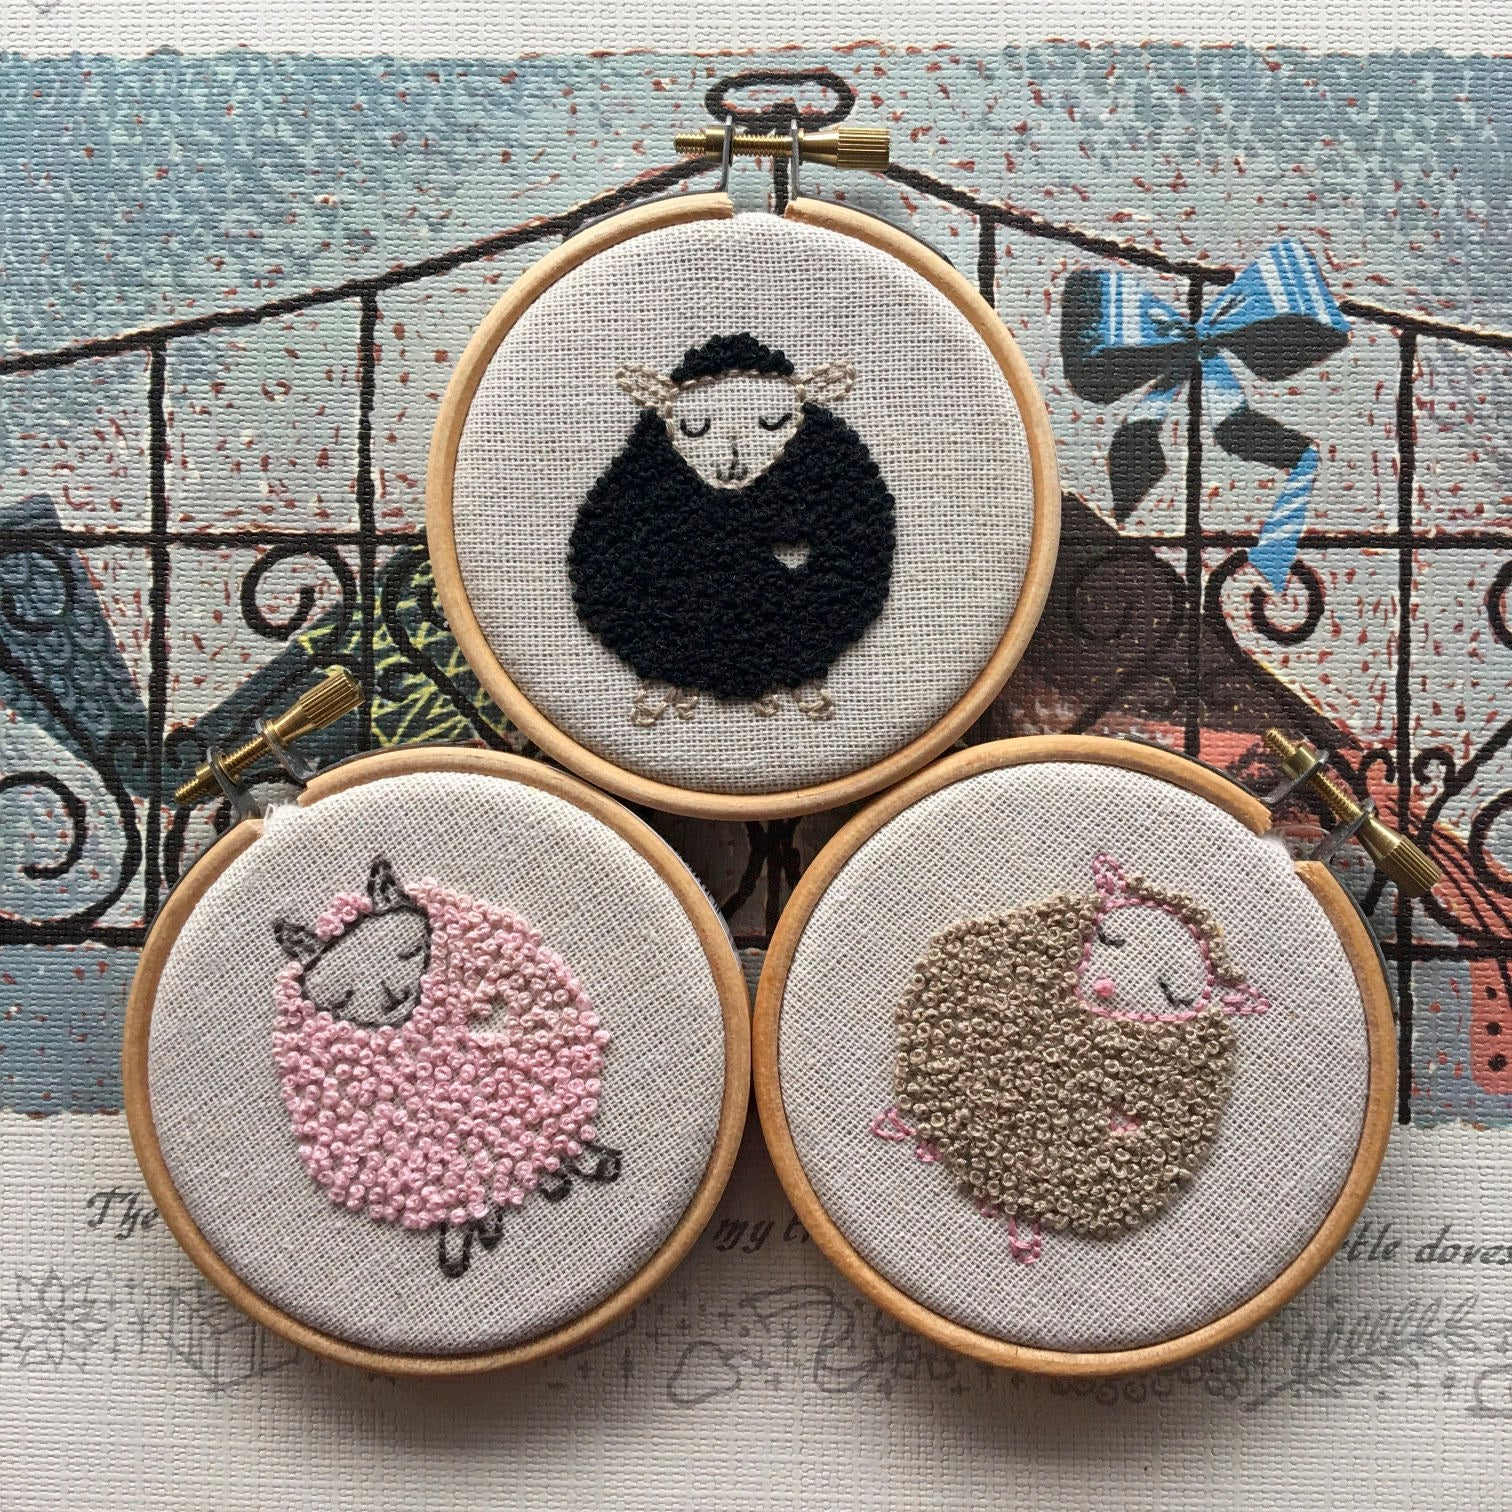 French Knots Embroidery Patterns French Knot Sheep Trio Pattern Instant Pdf Download